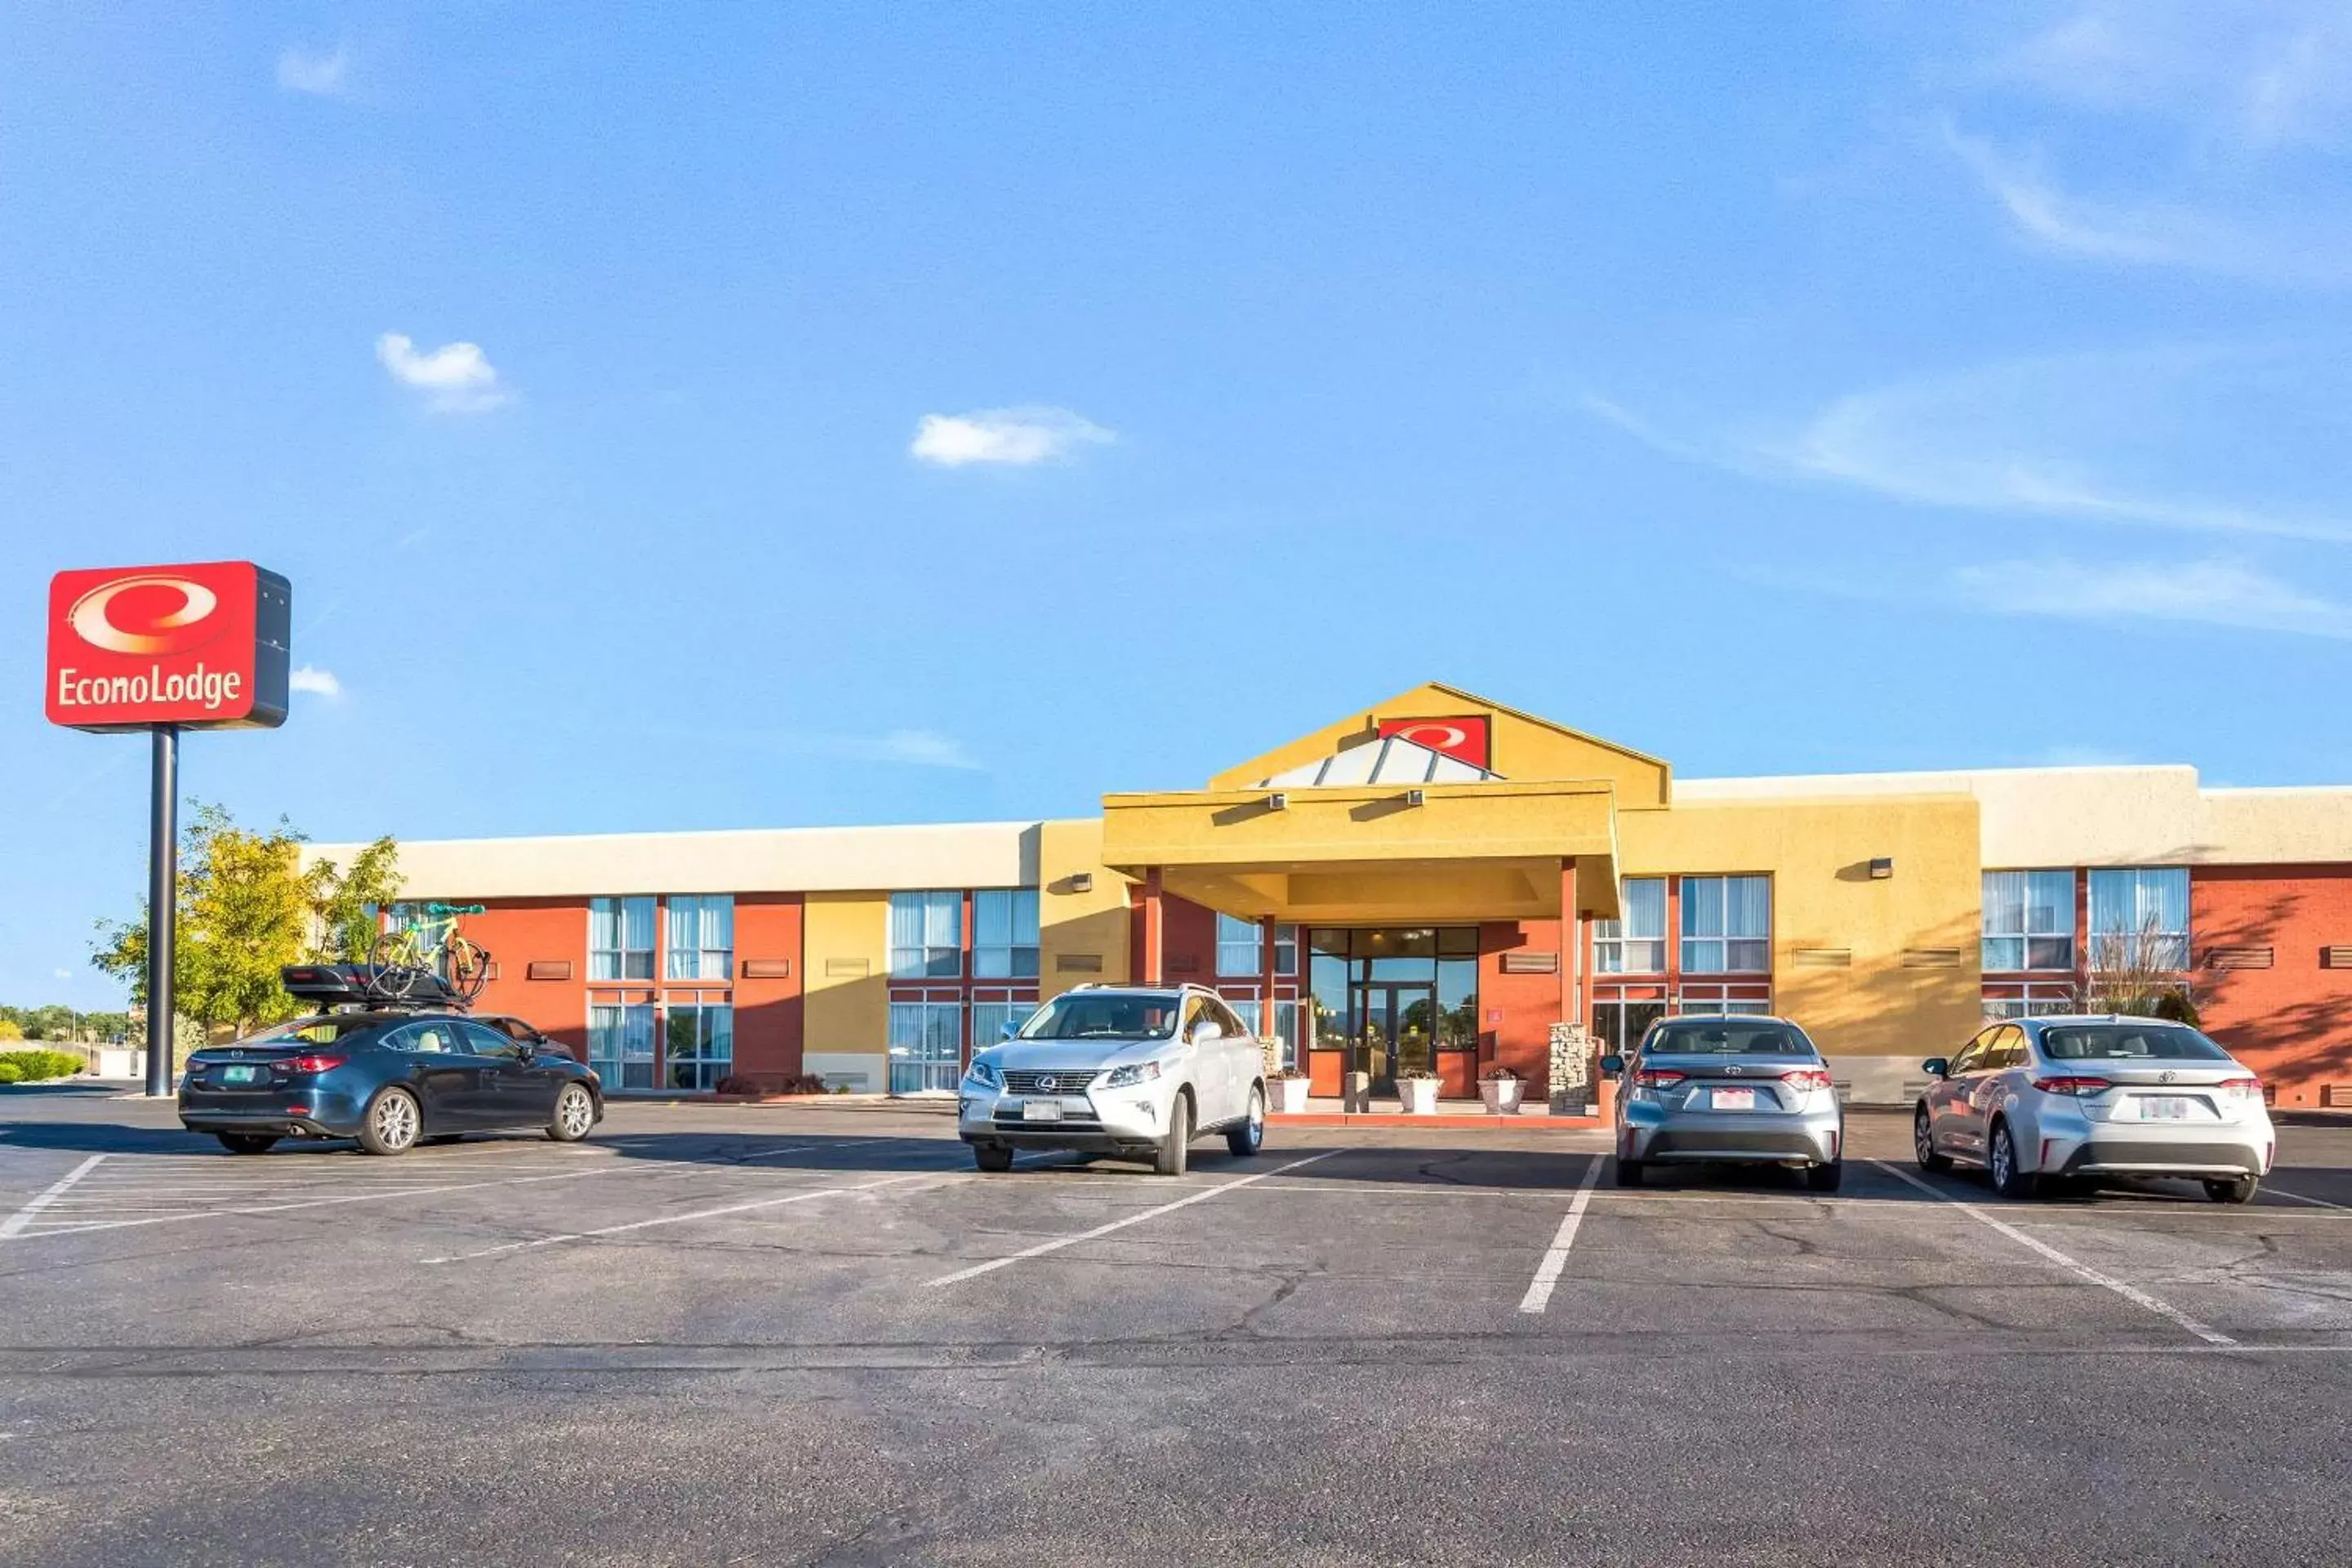 Property building in Econo Lodge Grand Junction